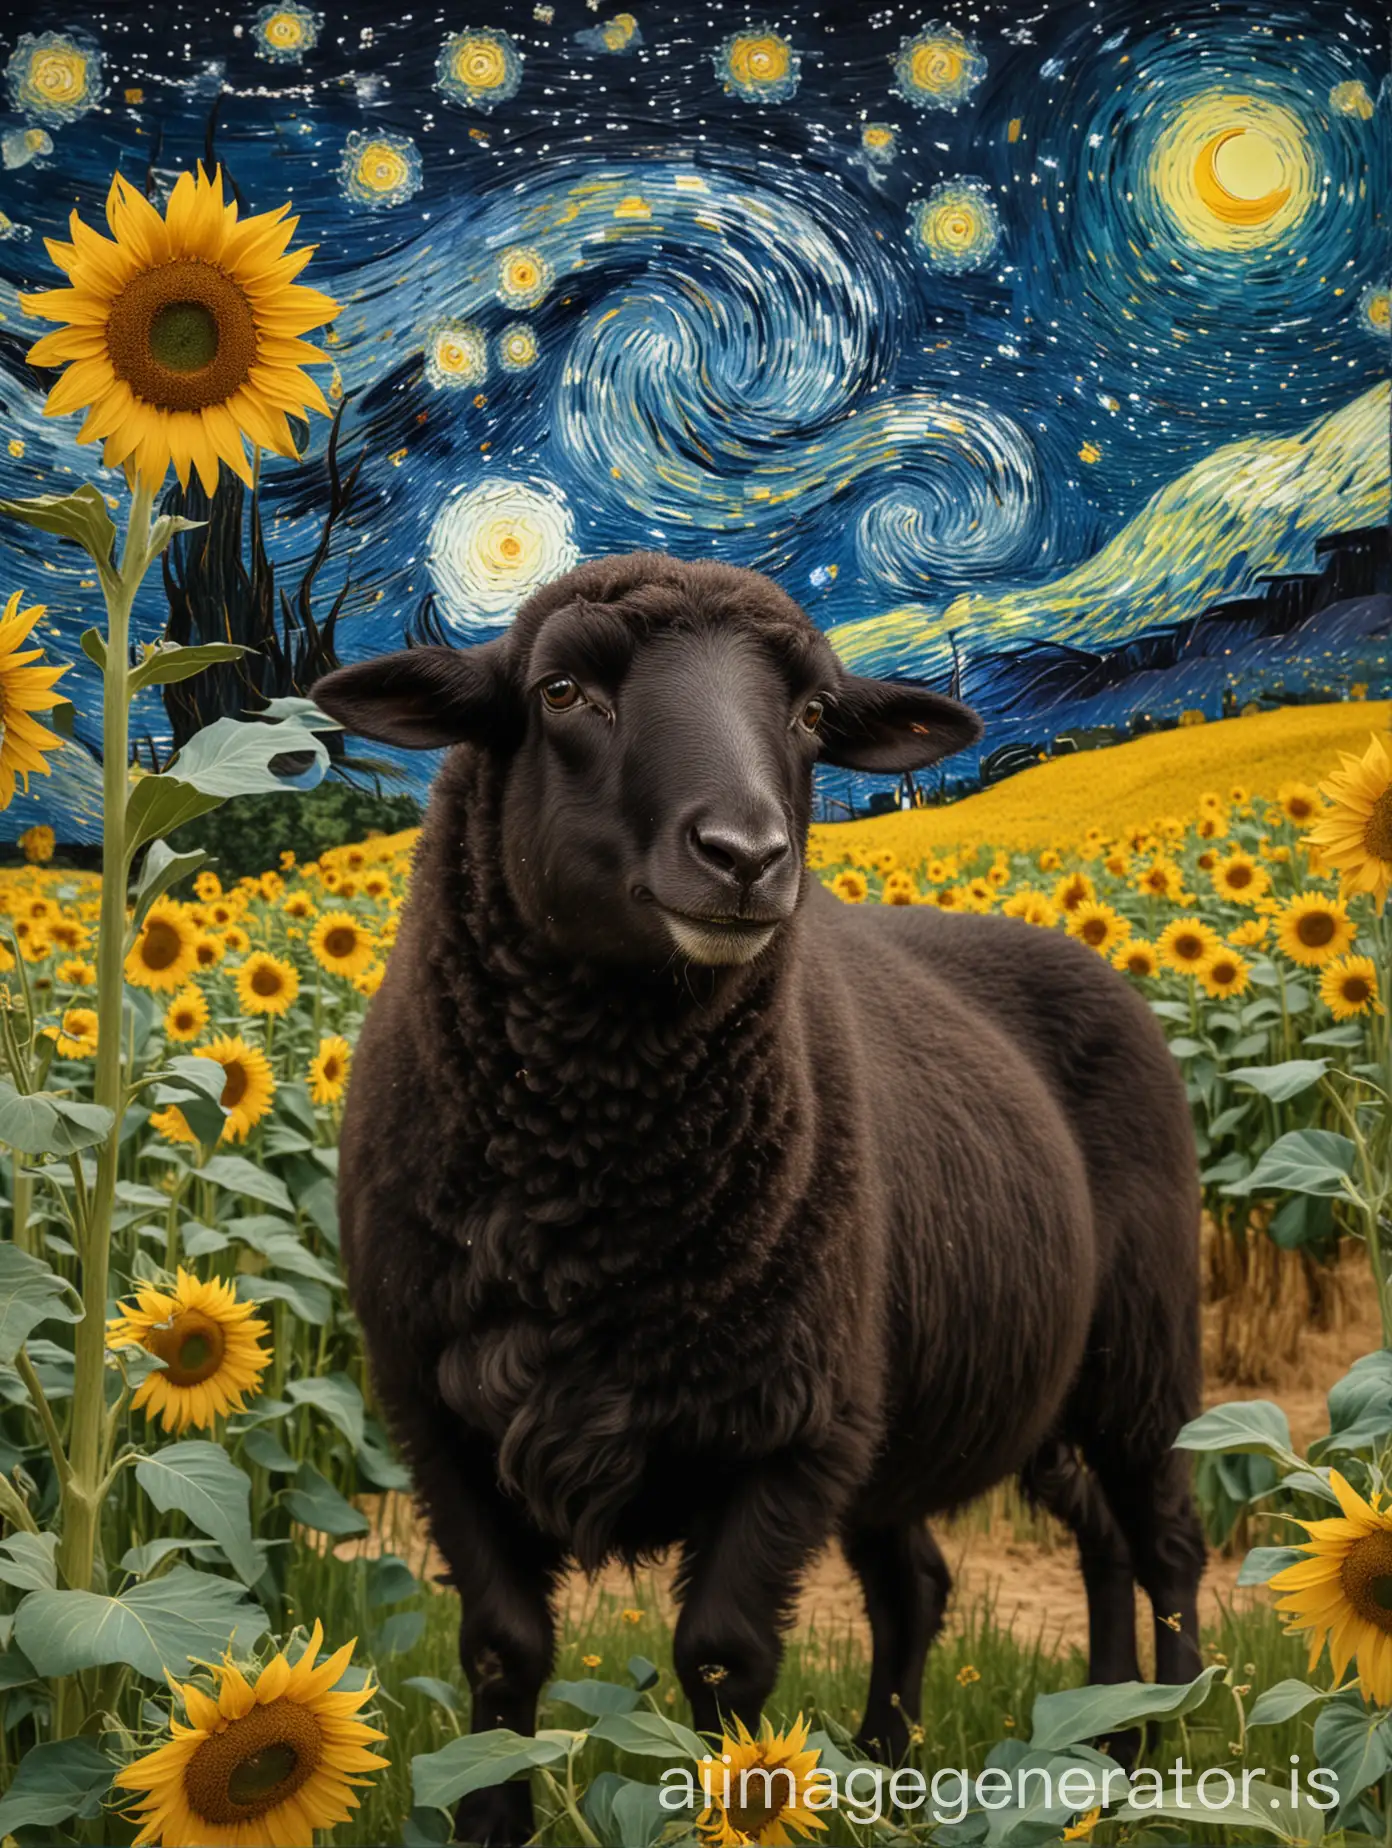 Starry-Night-Sky-with-Black-Faced-Sheep-and-Sunflowers-in-a-Field